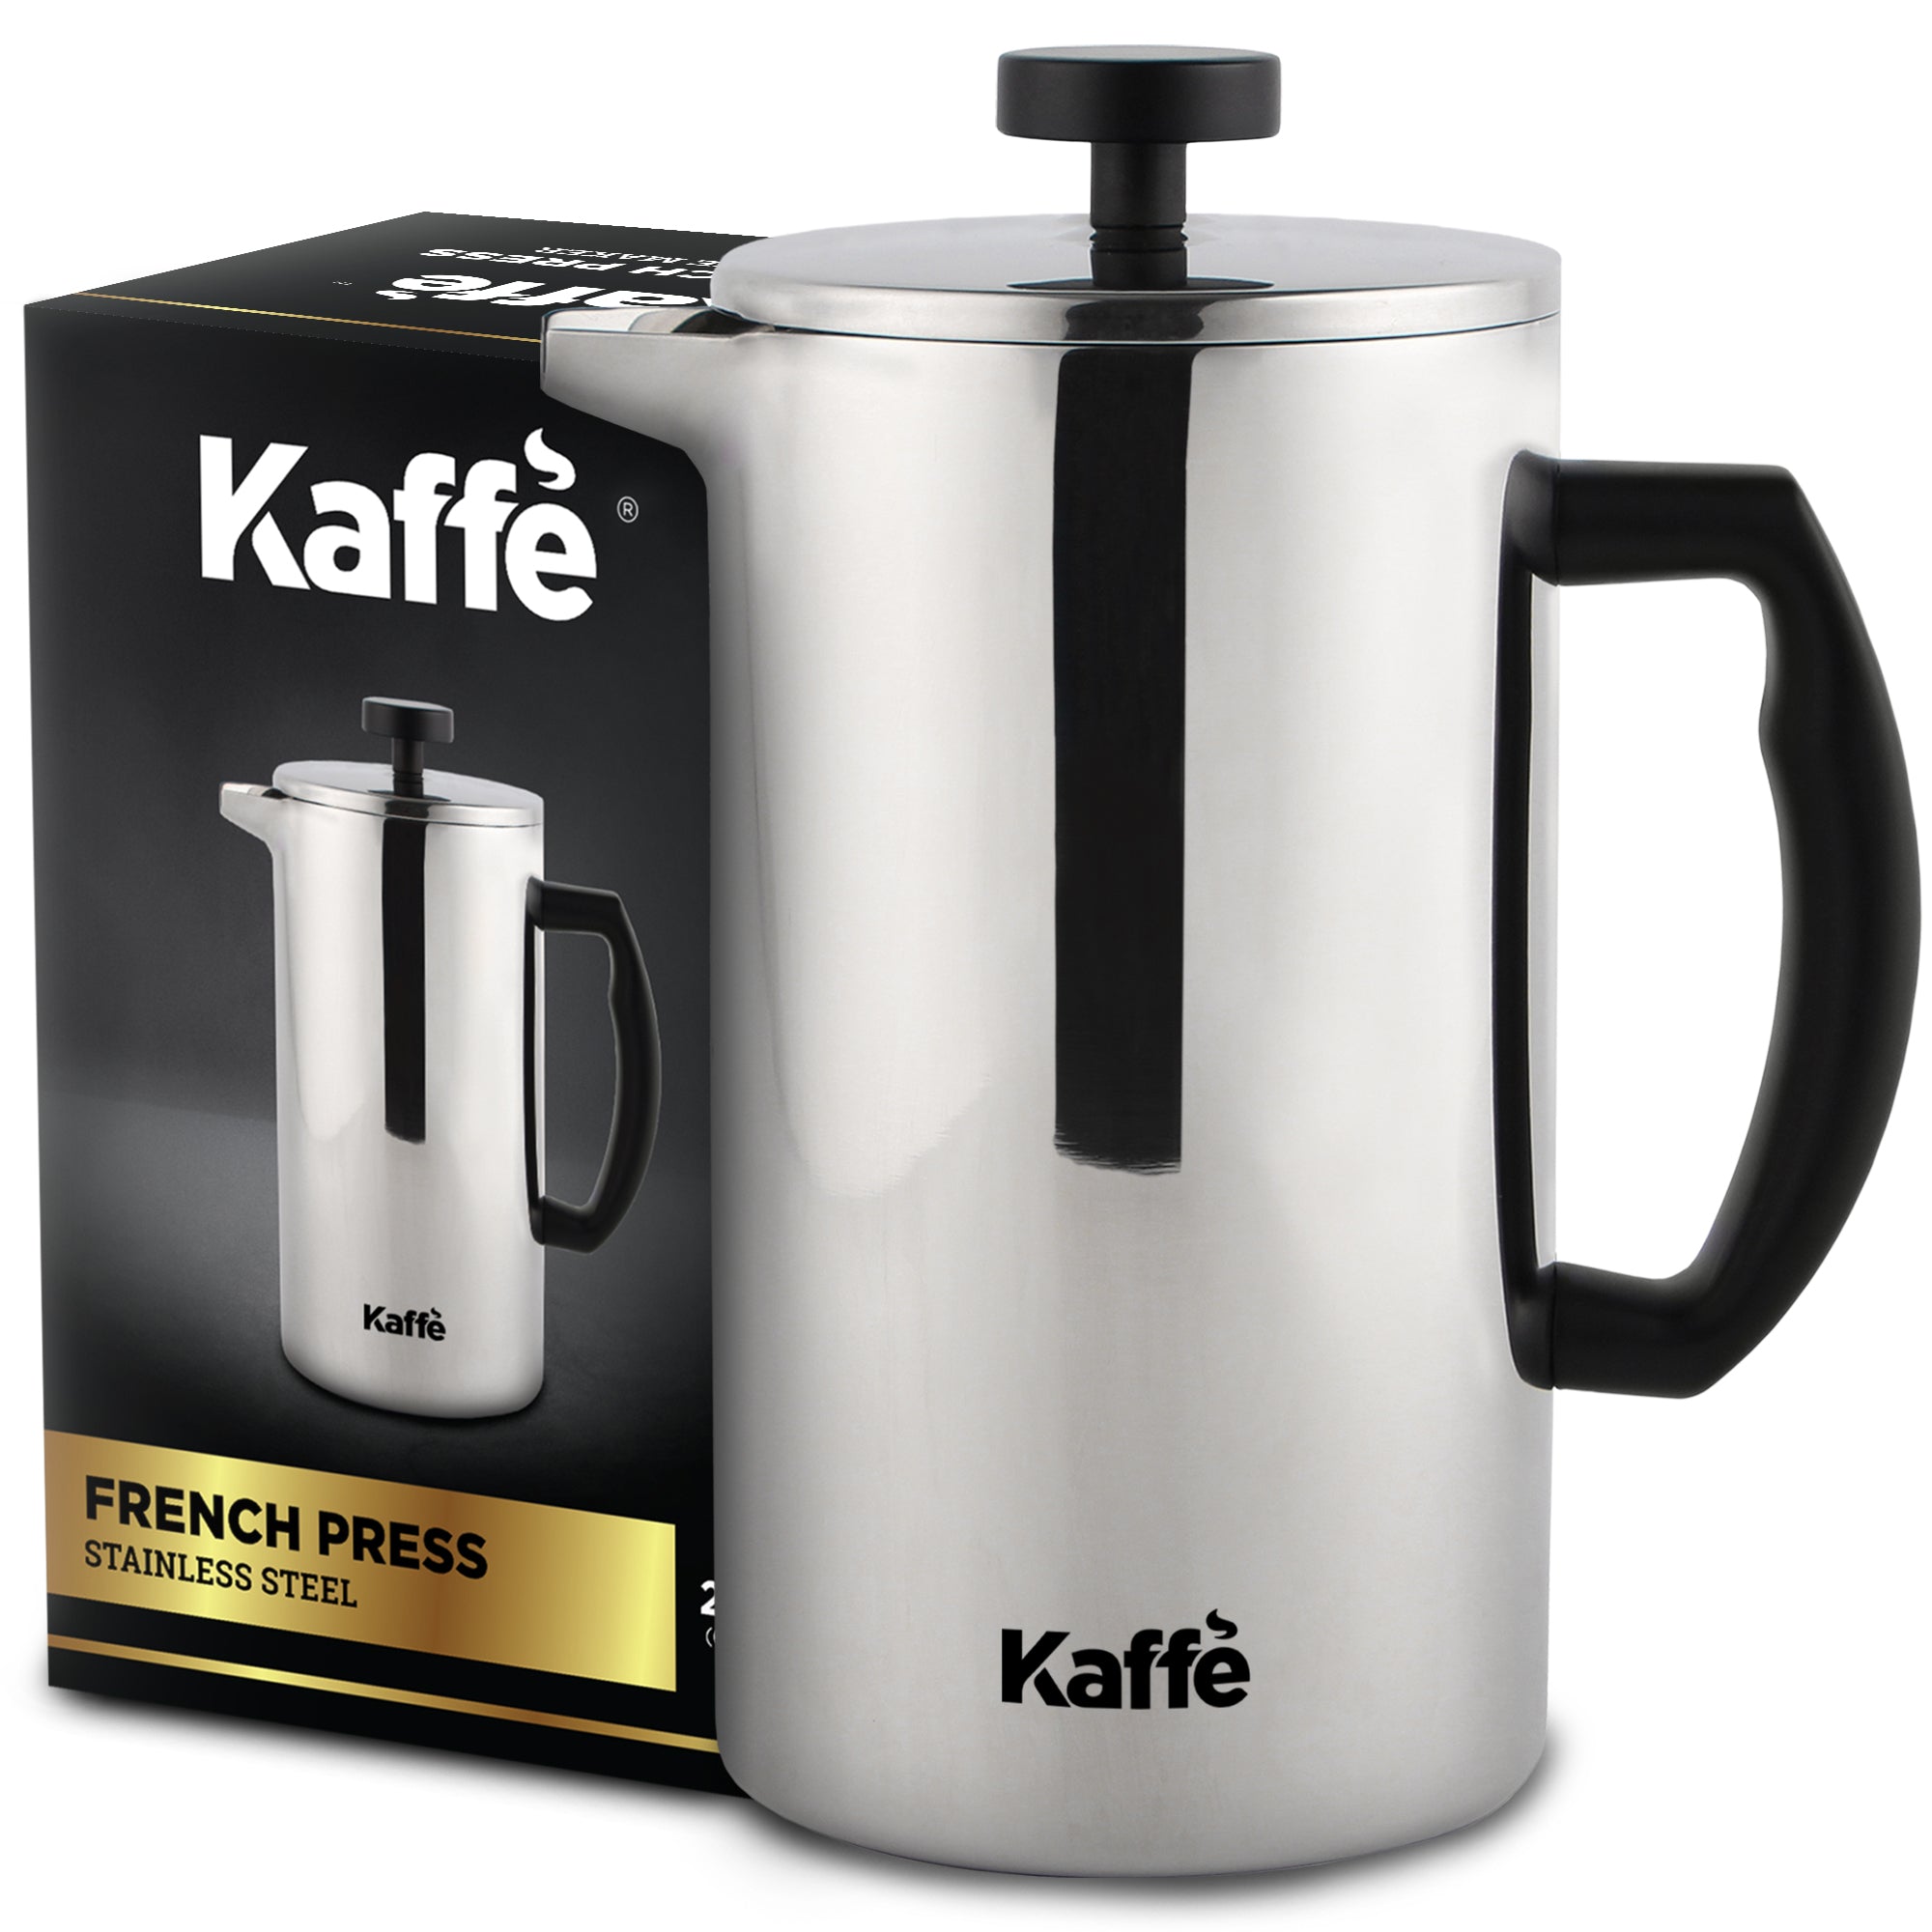 Press Kaffe Steel KF1020 Products Stainless – French